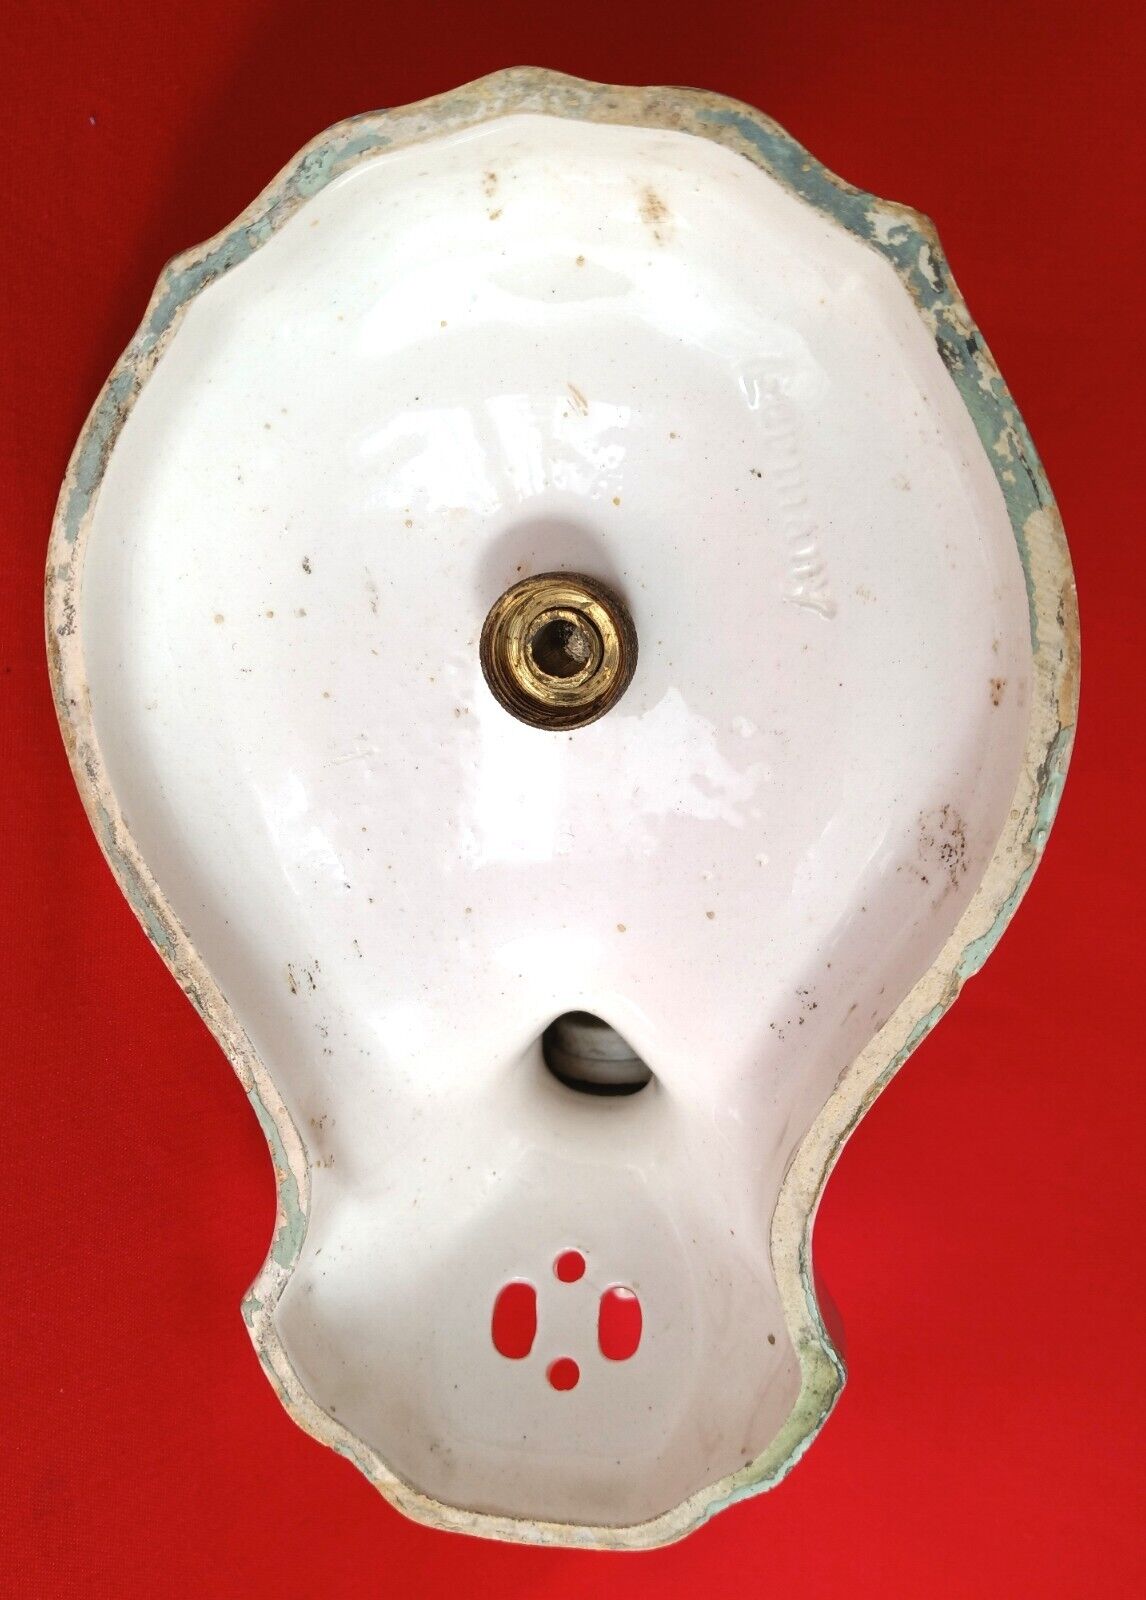 Antique Old Reclaimed Salvaged Ceramic Bathroom Wall Mount Sconce Collectible Retro Lighting - Germany